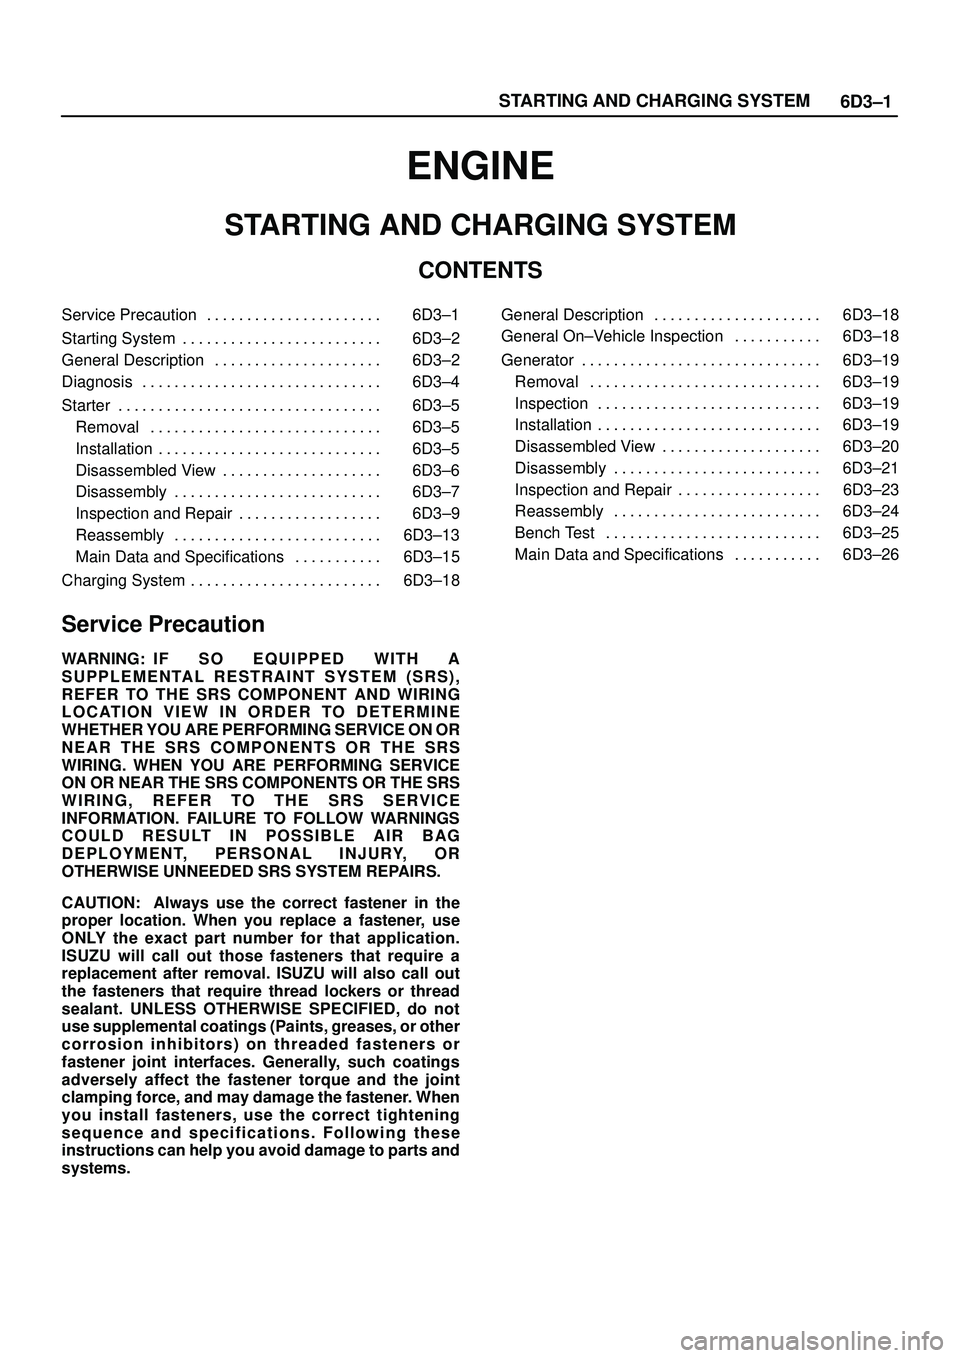 ISUZU TROOPER 1998  Service Owners Manual 6D3±1 STARTING AND CHARGING SYSTEM
ENGINE
STARTING AND CHARGING SYSTEM
CONTENTS
Service Precaution 6D3±1. . . . . . . . . . . . . . . . . . . . . . 
Starting System 6D3±2. . . . . . . . . . . . . .